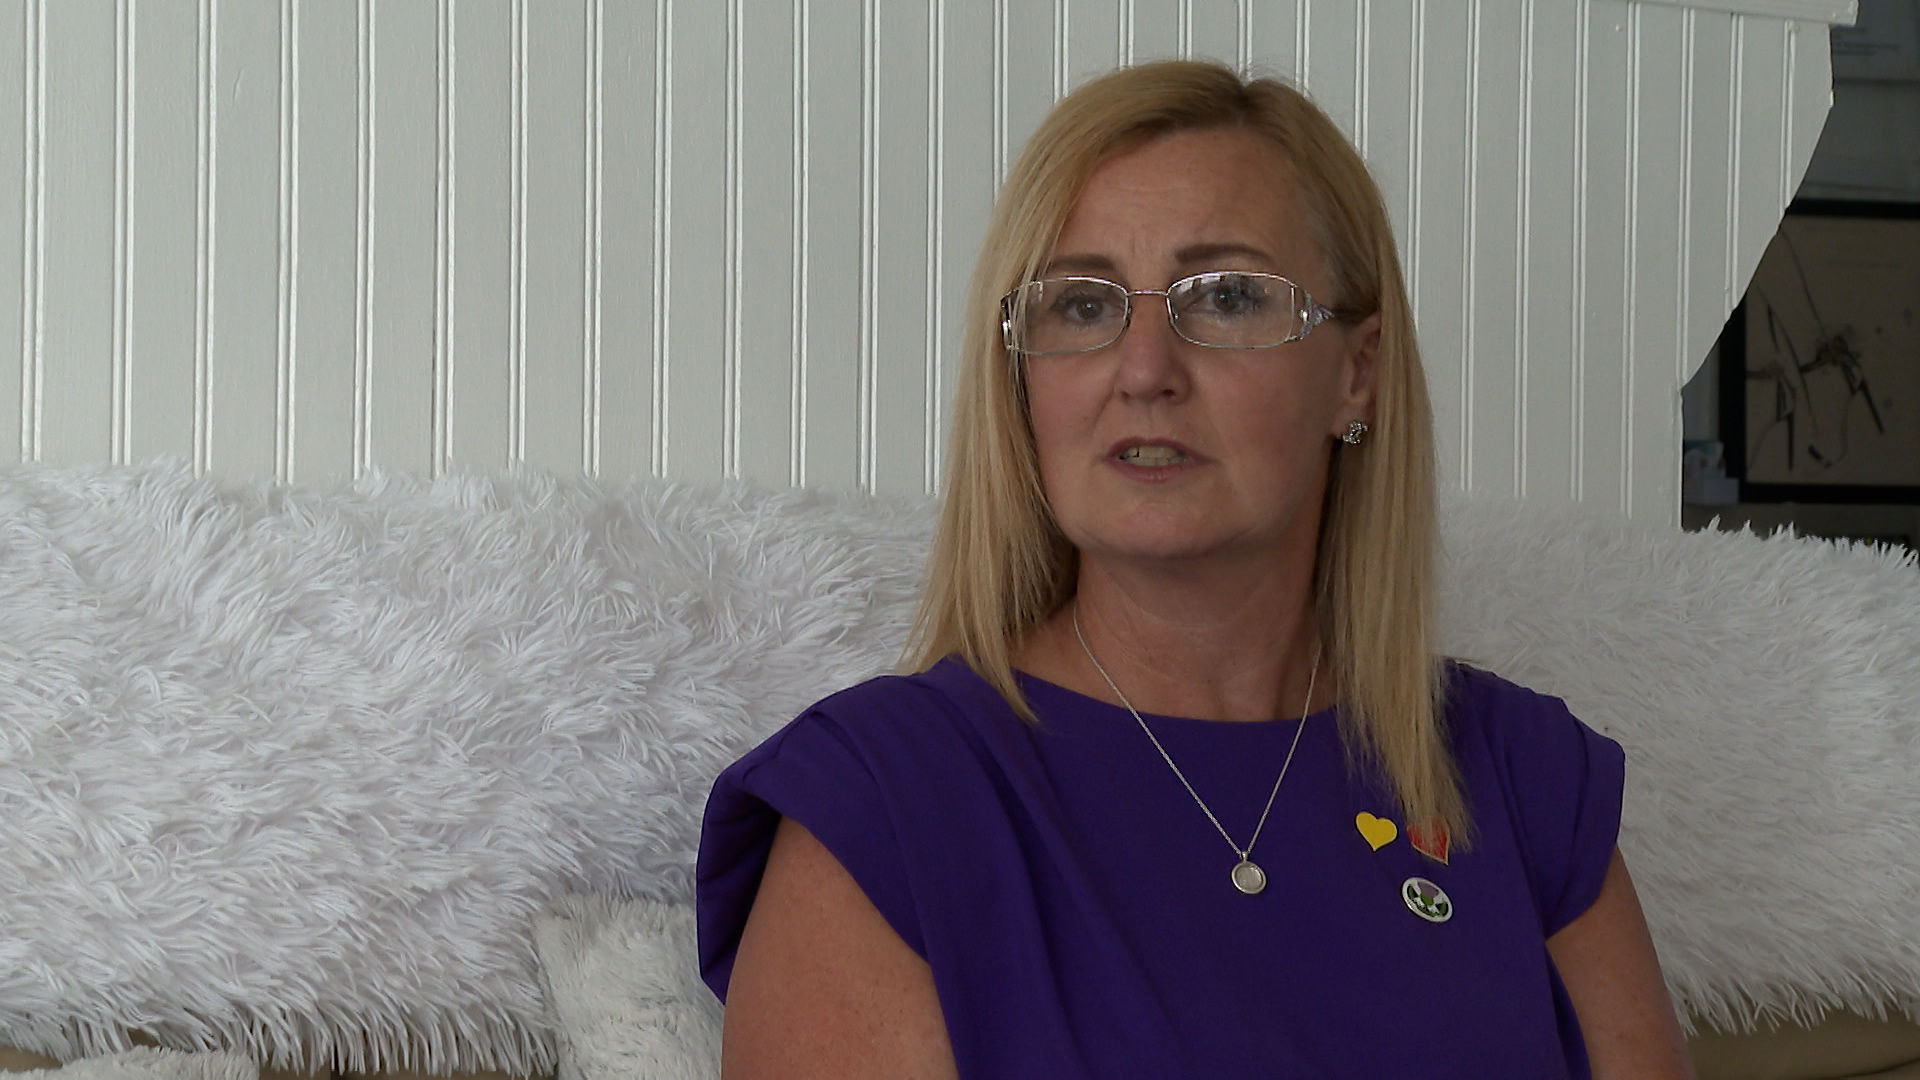 Jan Gillan said her family were unable to have a funeral for her late husband. (STV News)